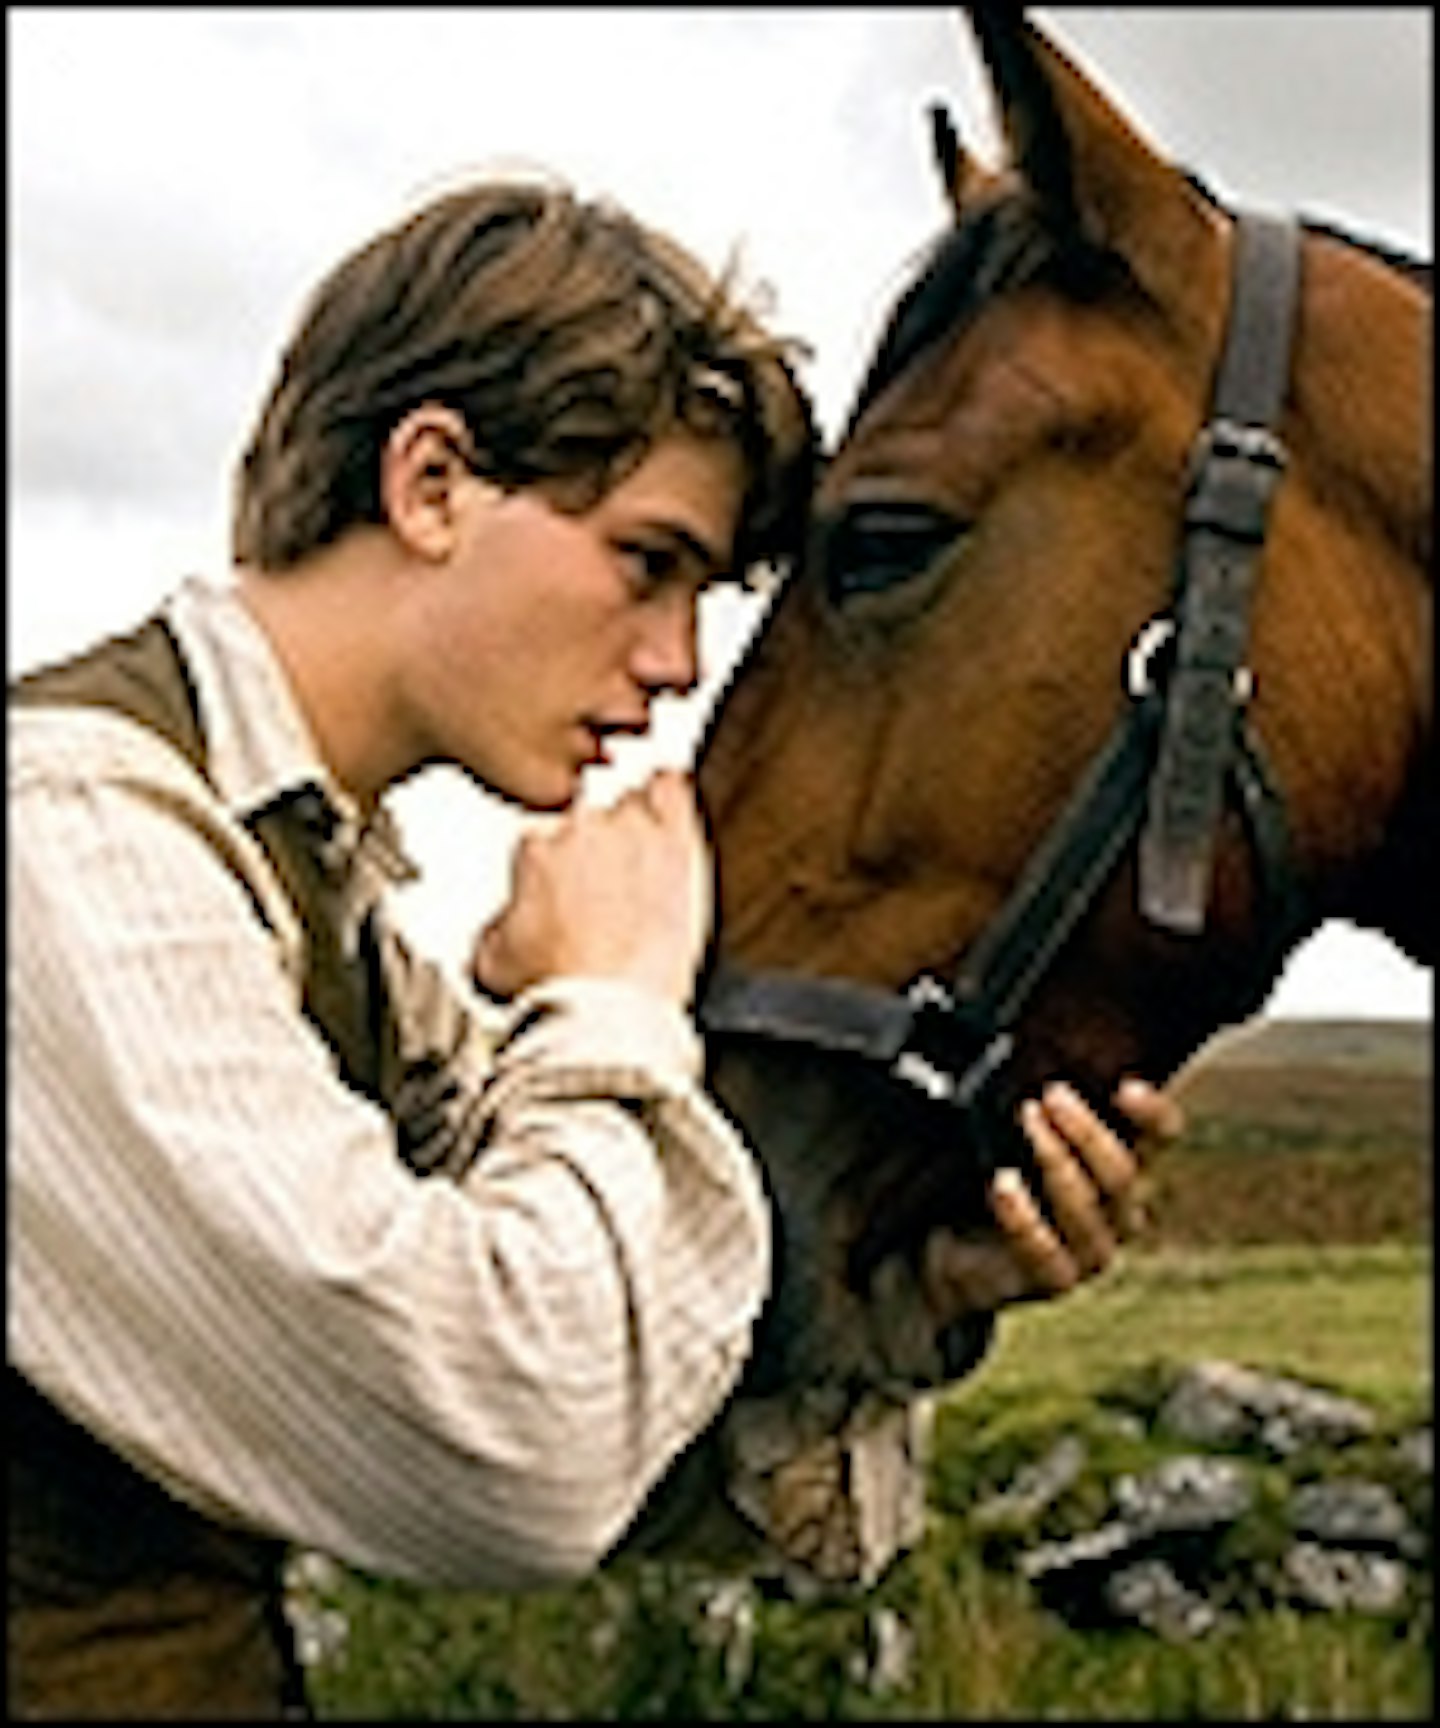 First Look At Spielberg's War Horse